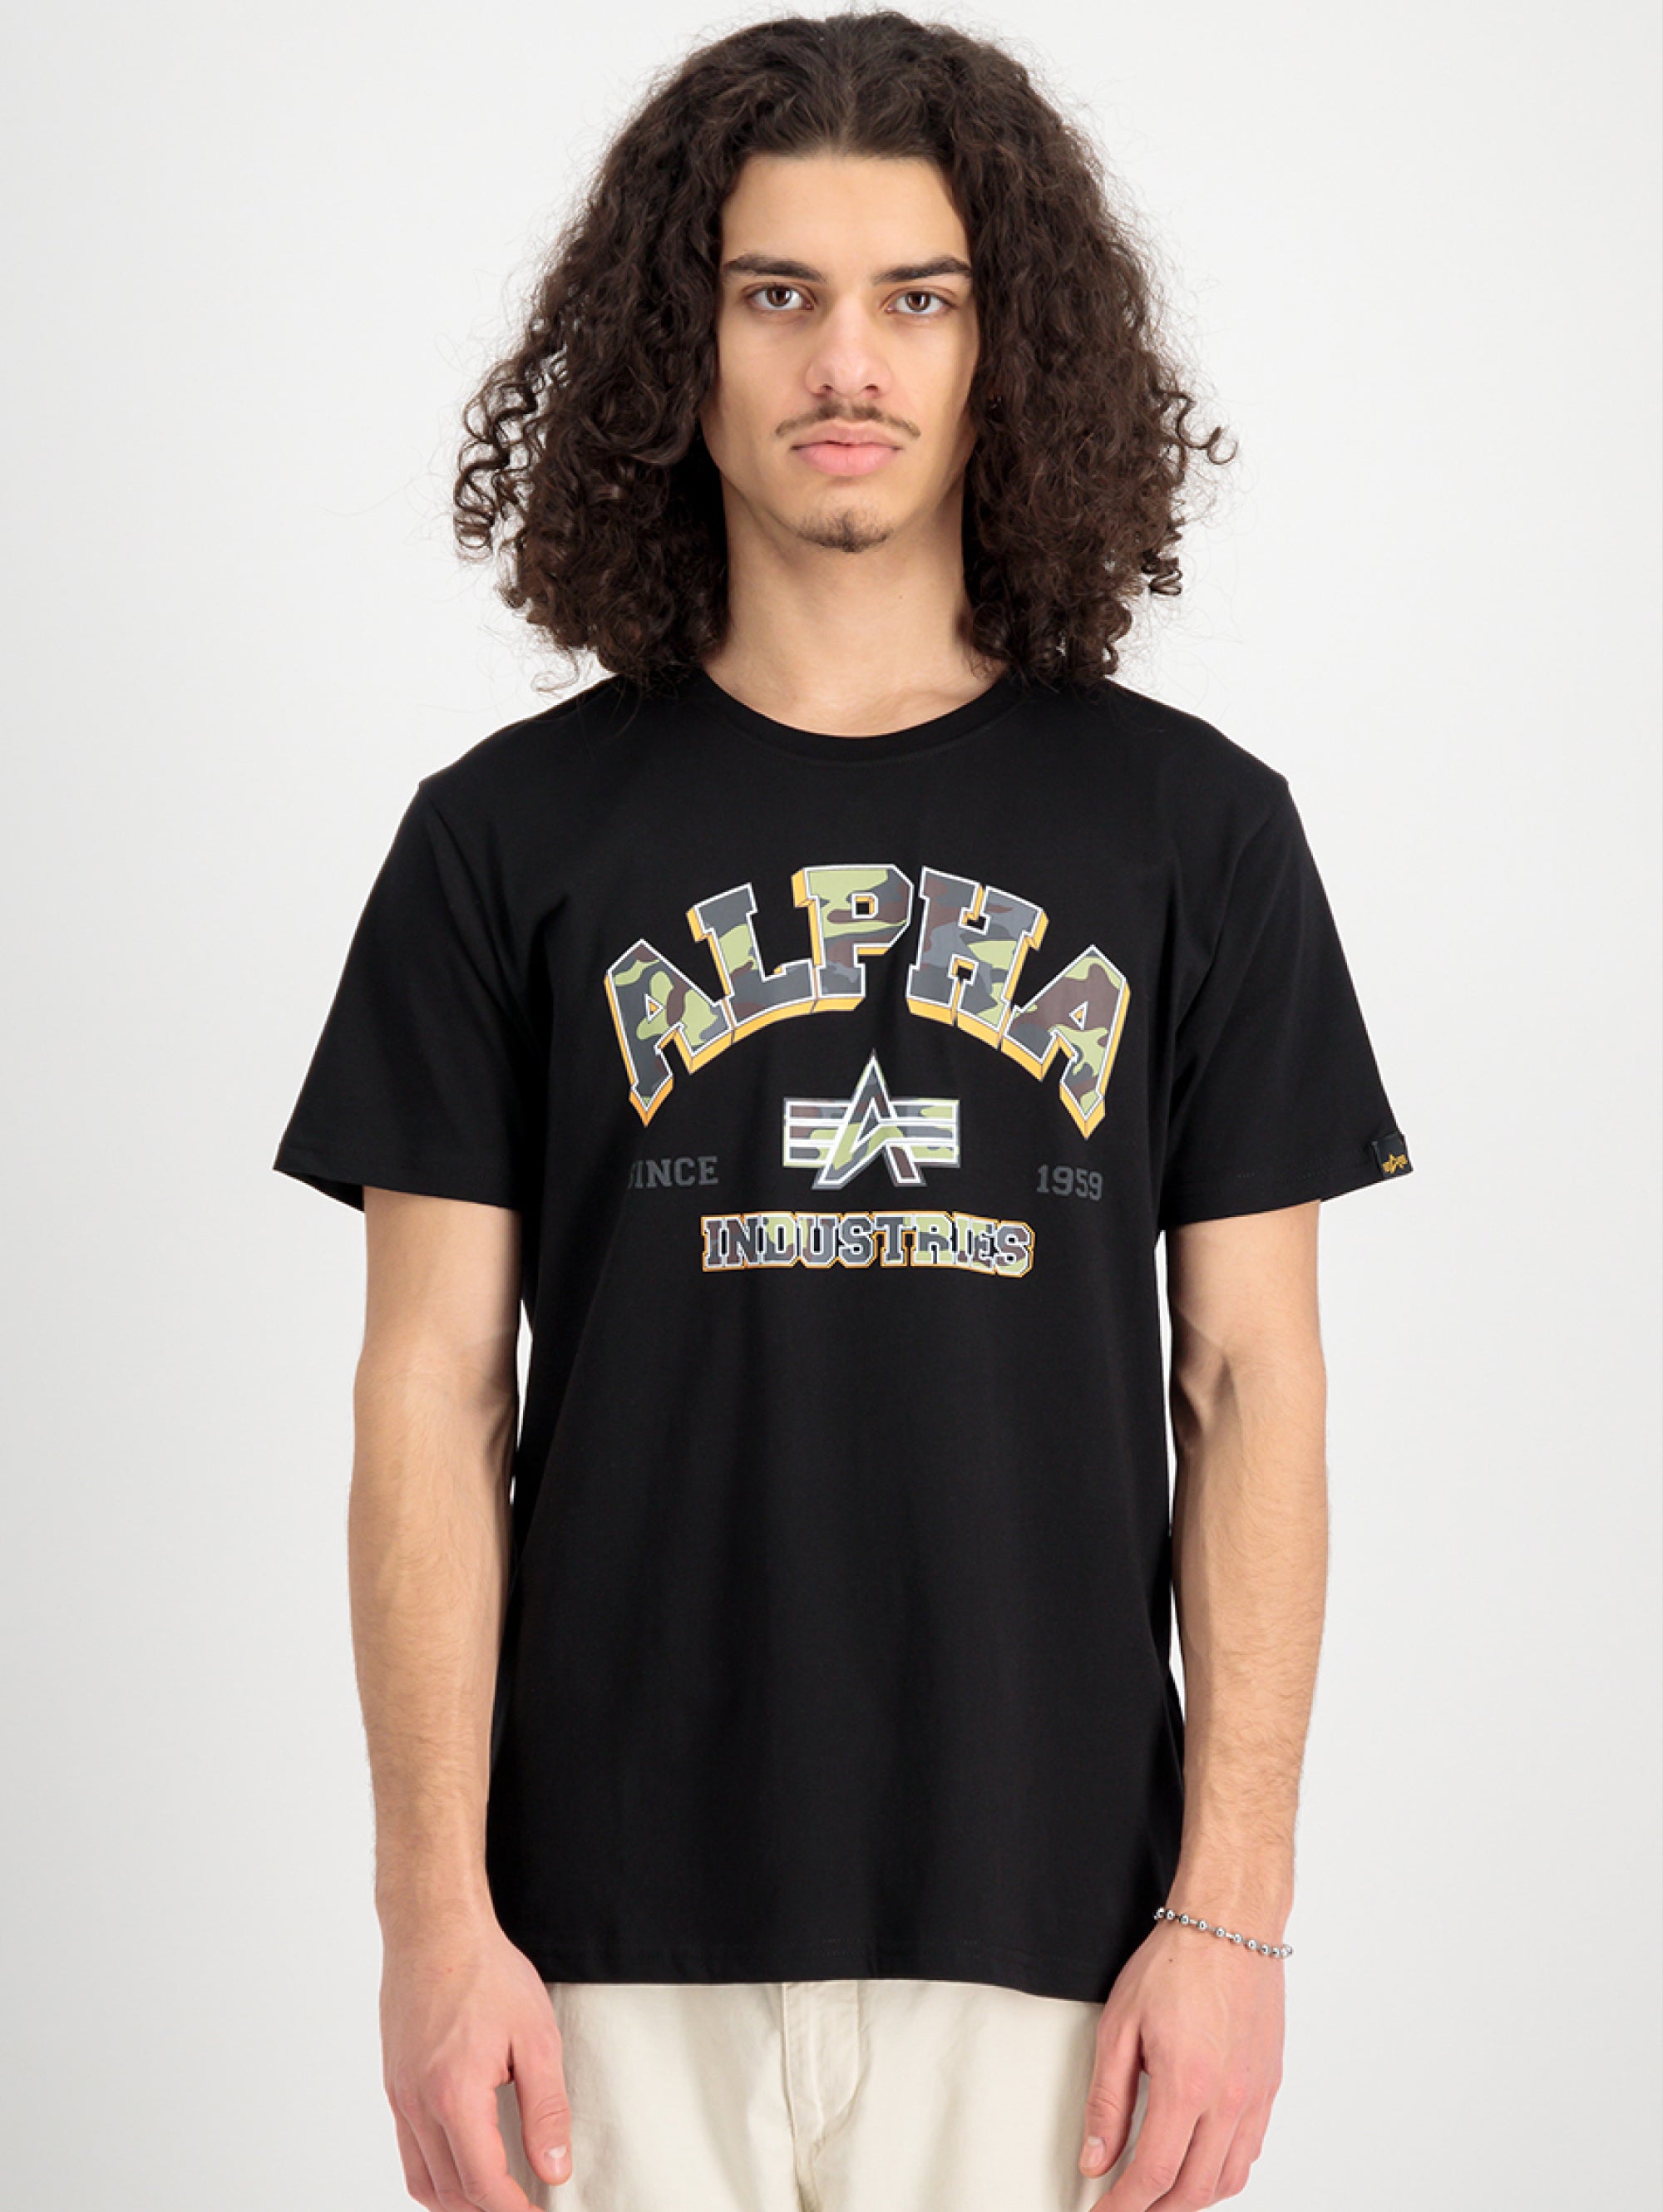 ALPHA INDUSTRIES-T-shirt con Stampa Camouflage Nero-TRYME Shop